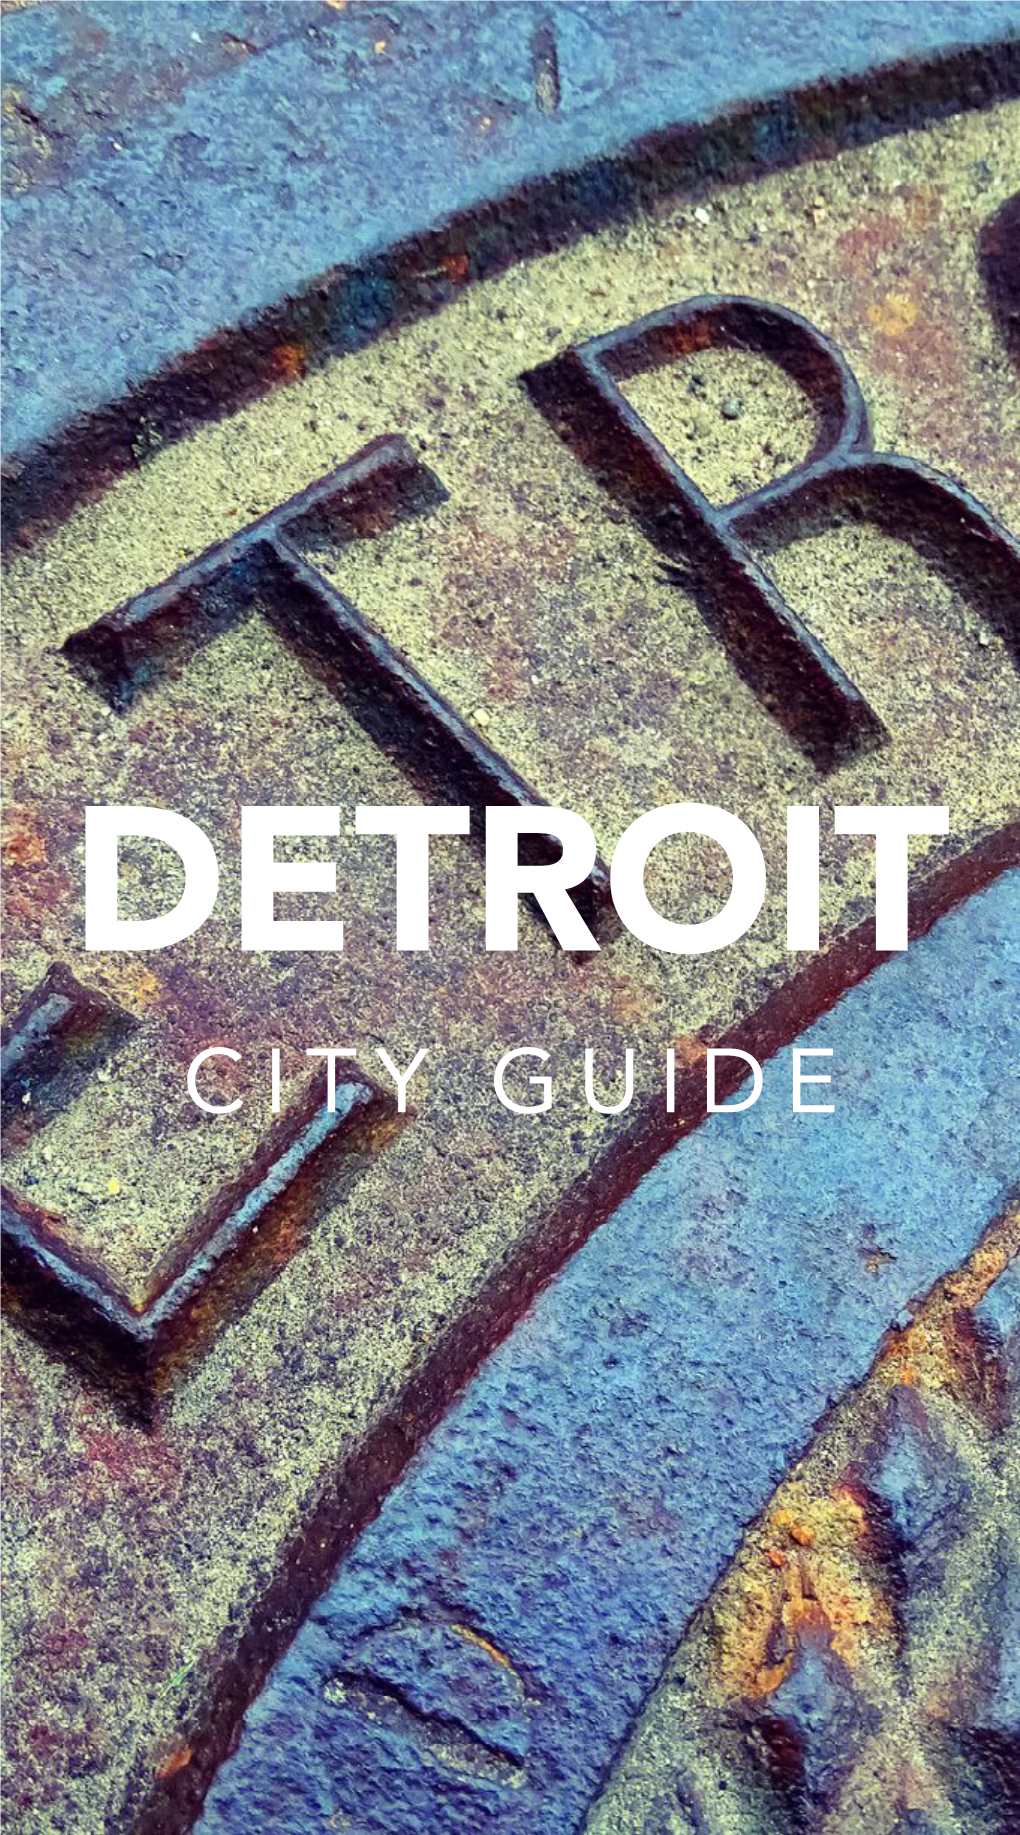 City Guide Table of Contents